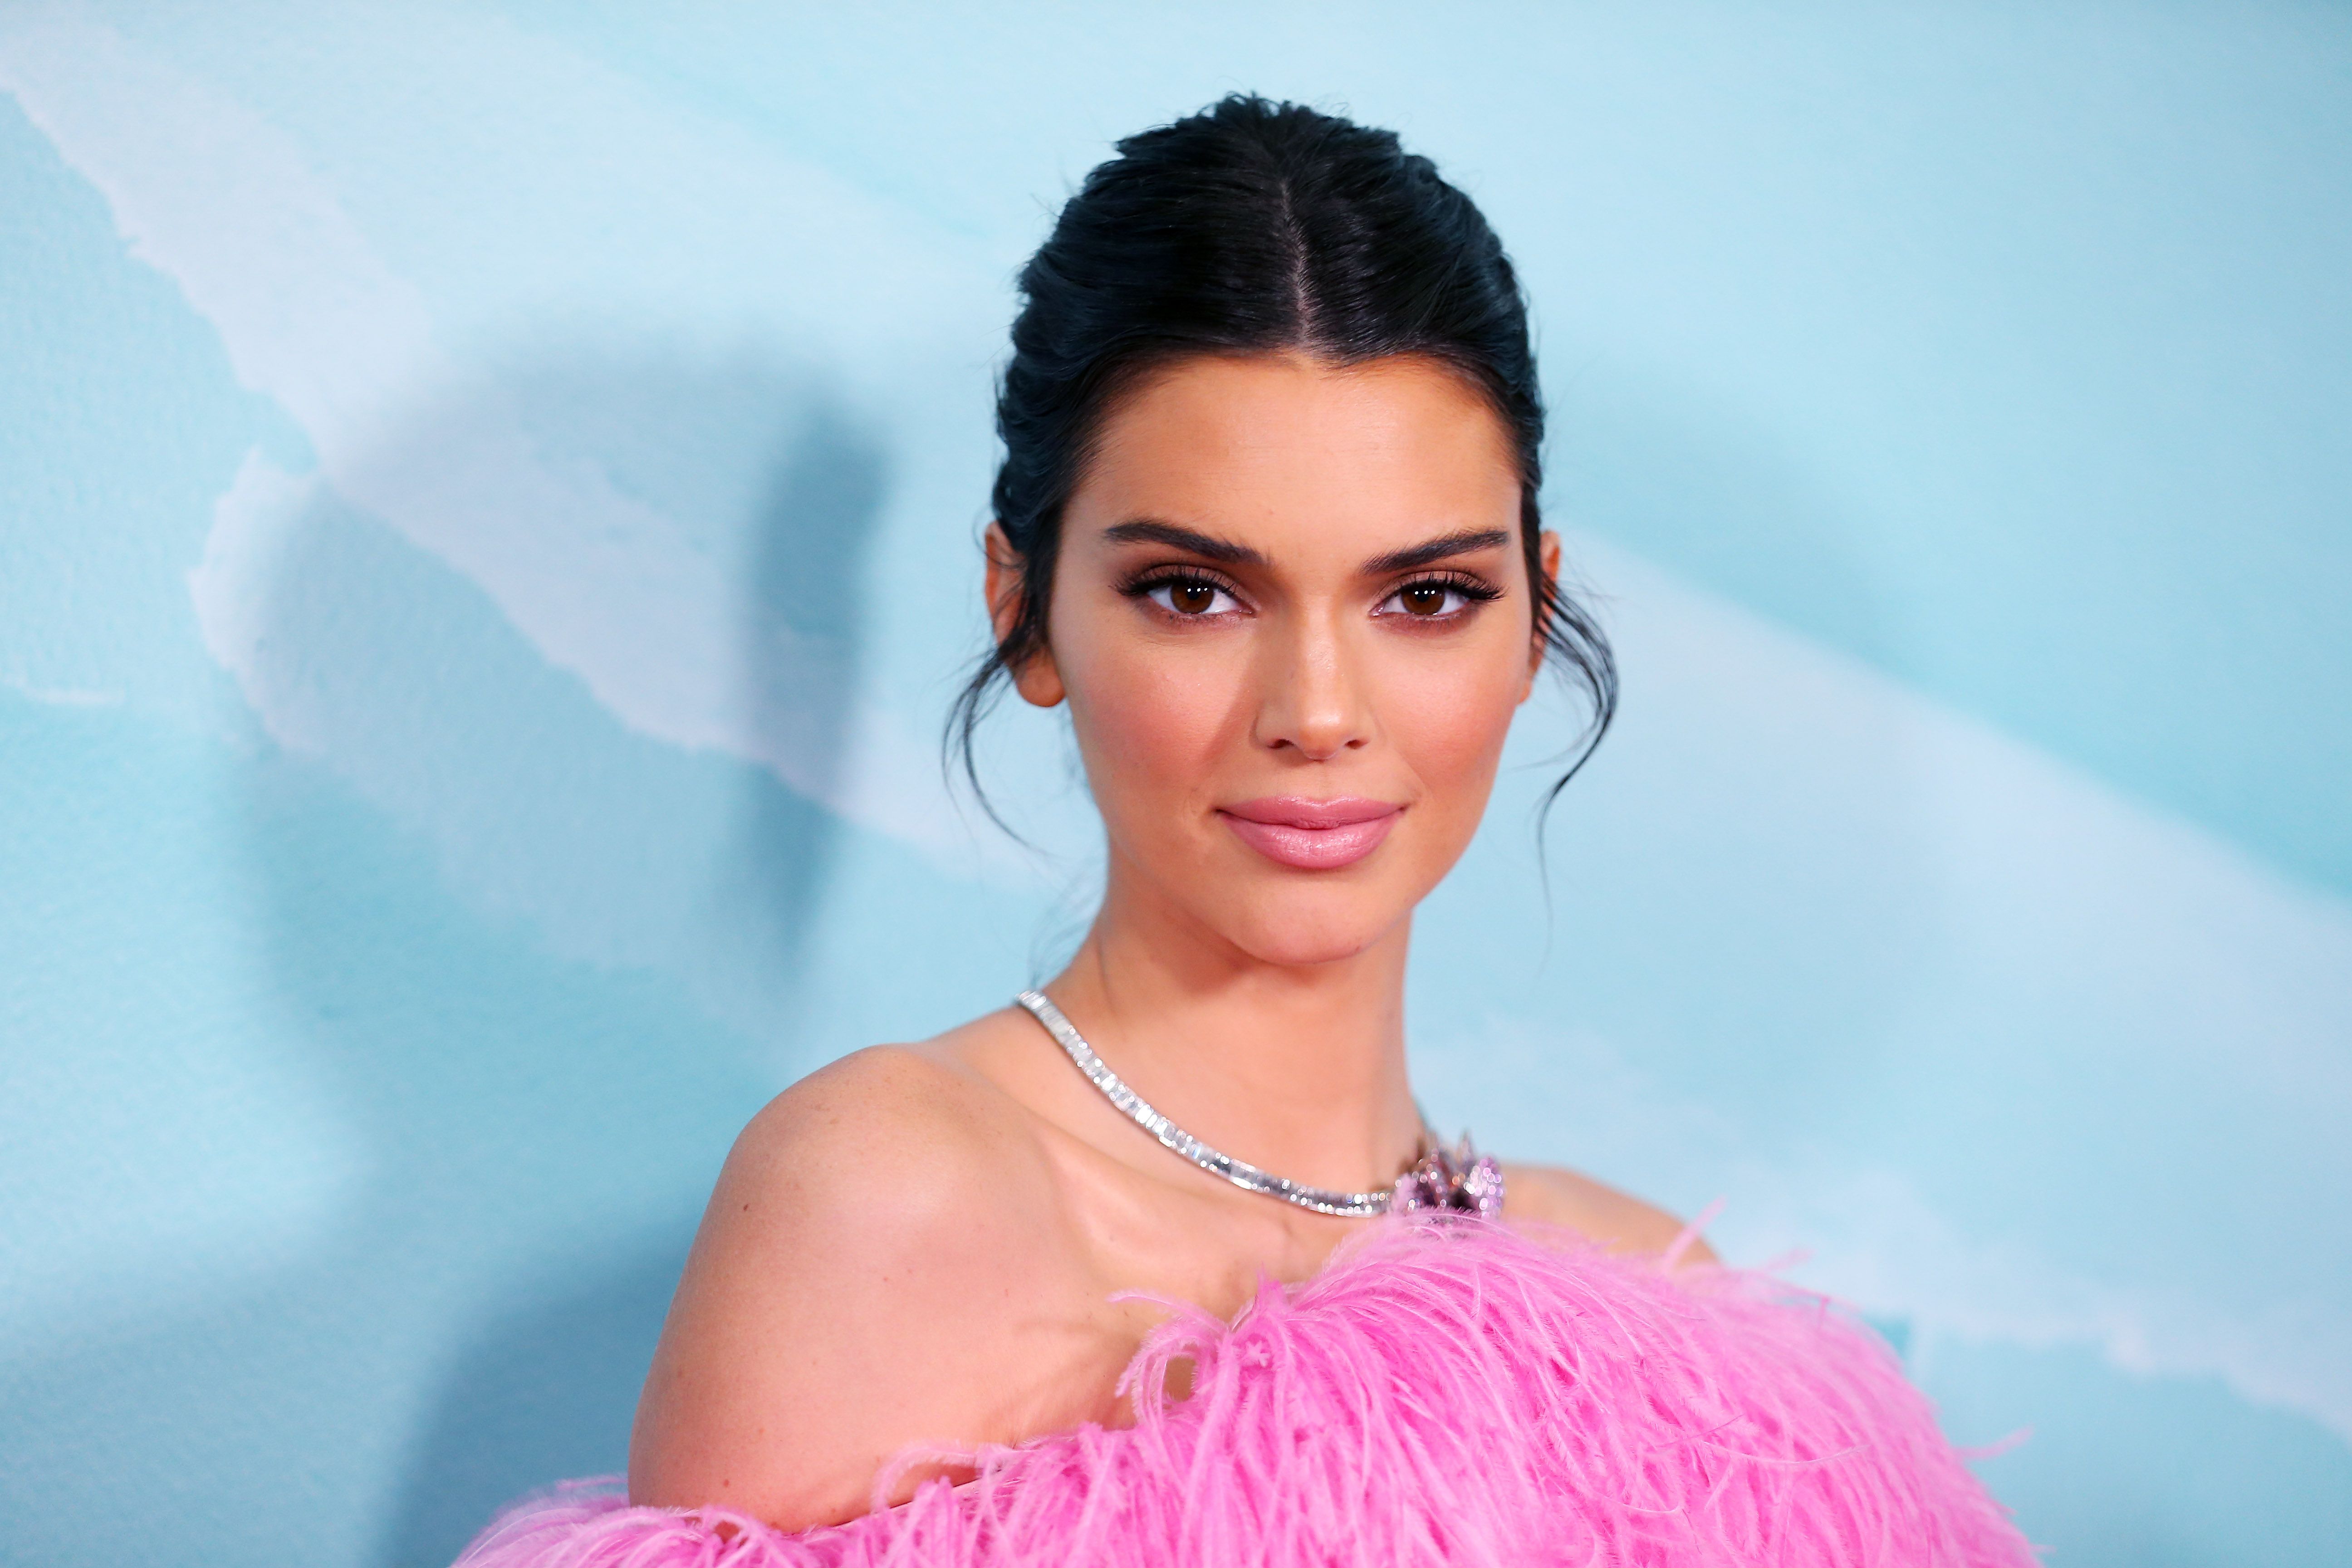 Kendall Jenner Shows Off Body In Lingerie Photo Shoot: Photo